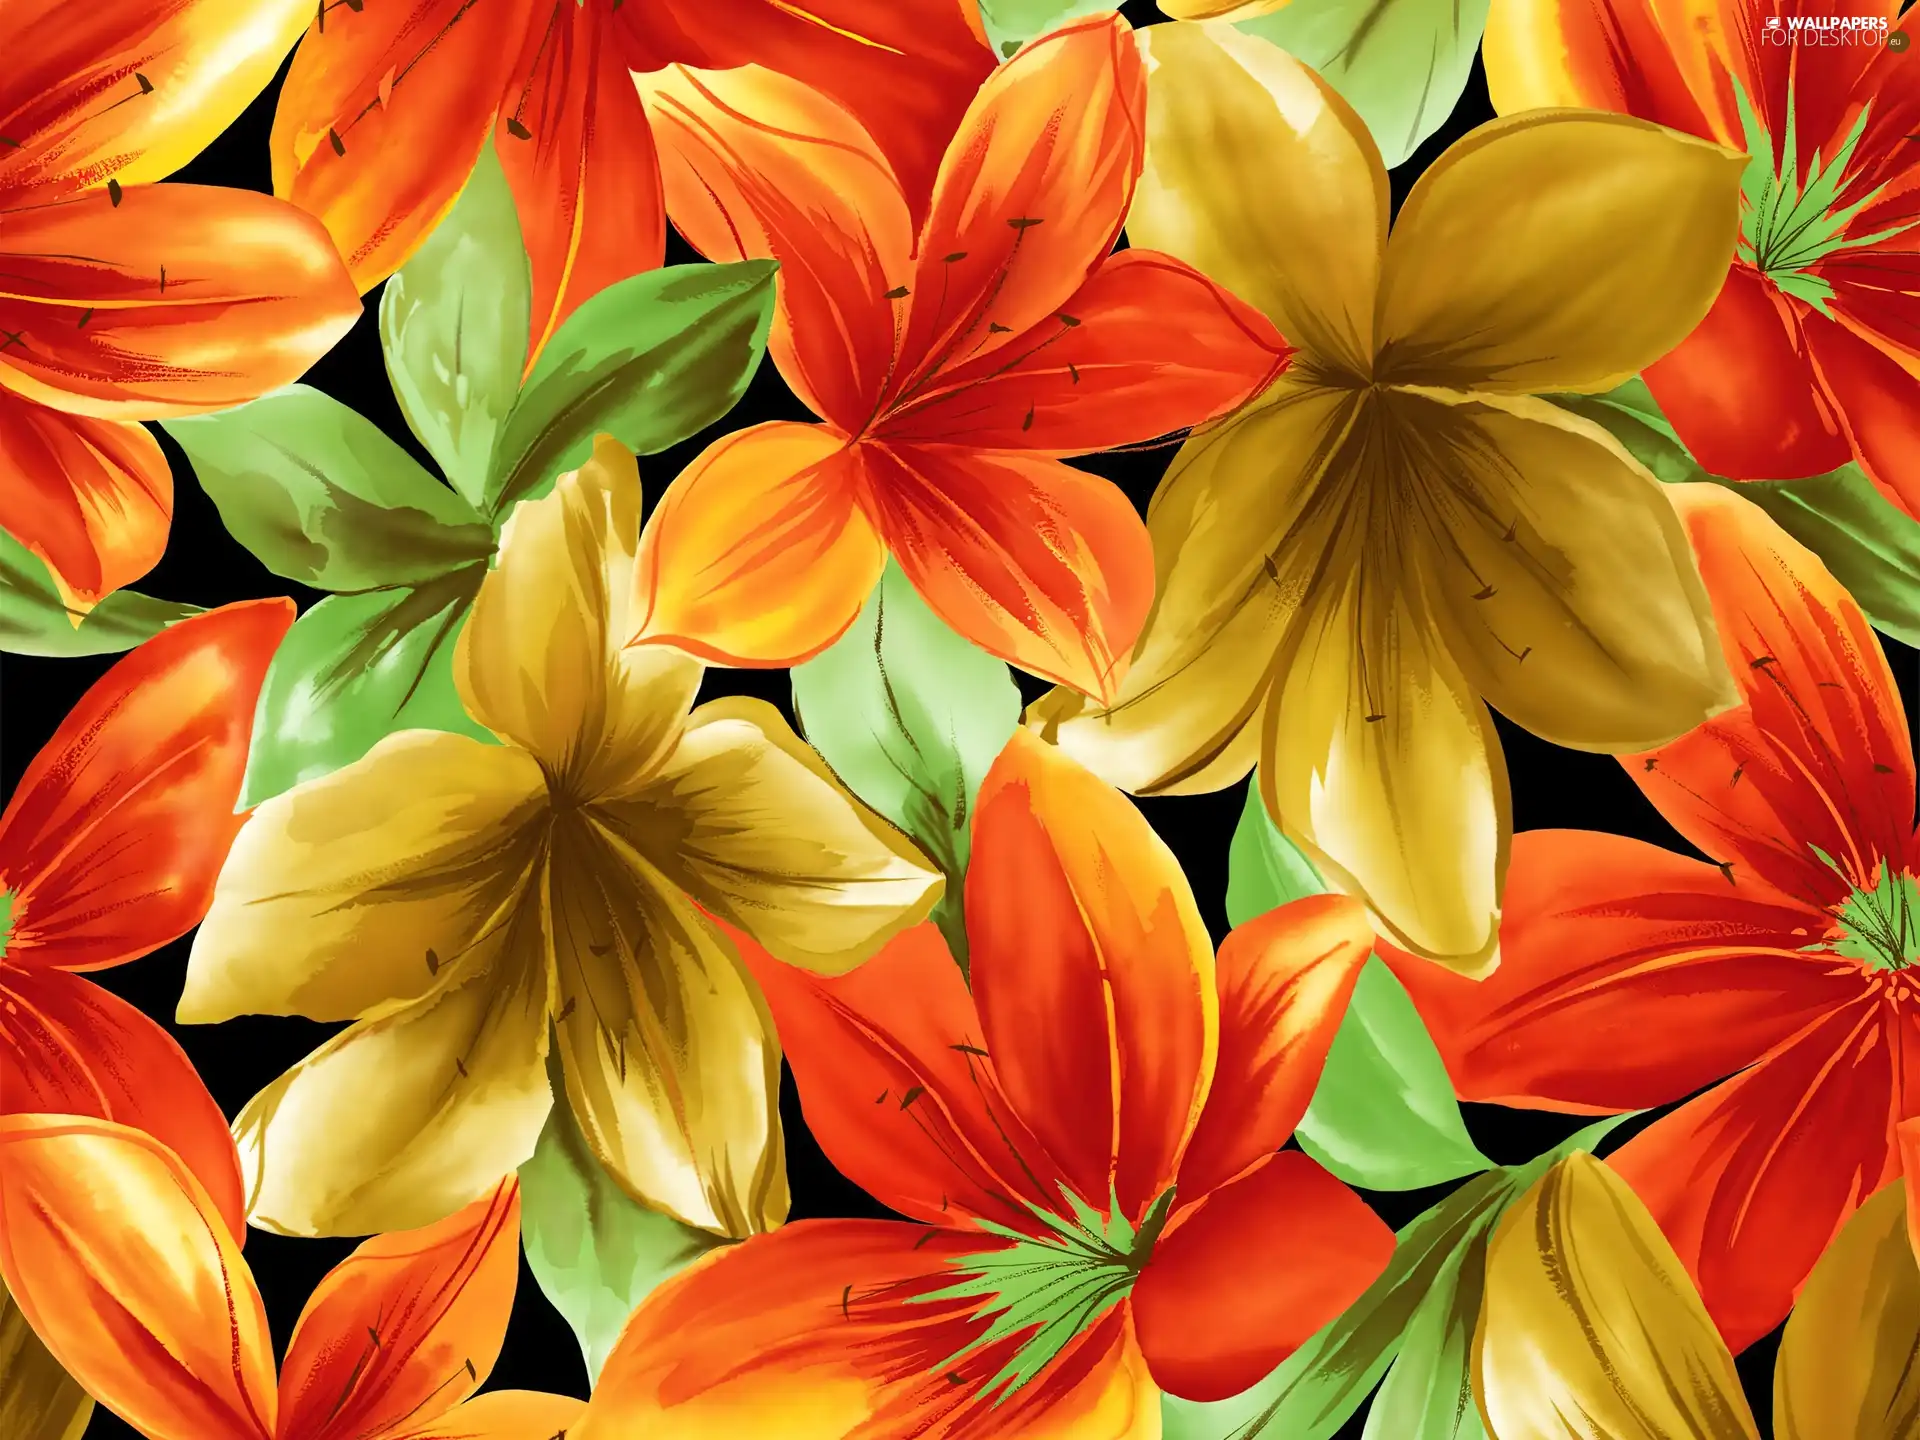 texture, Different colored, lilies